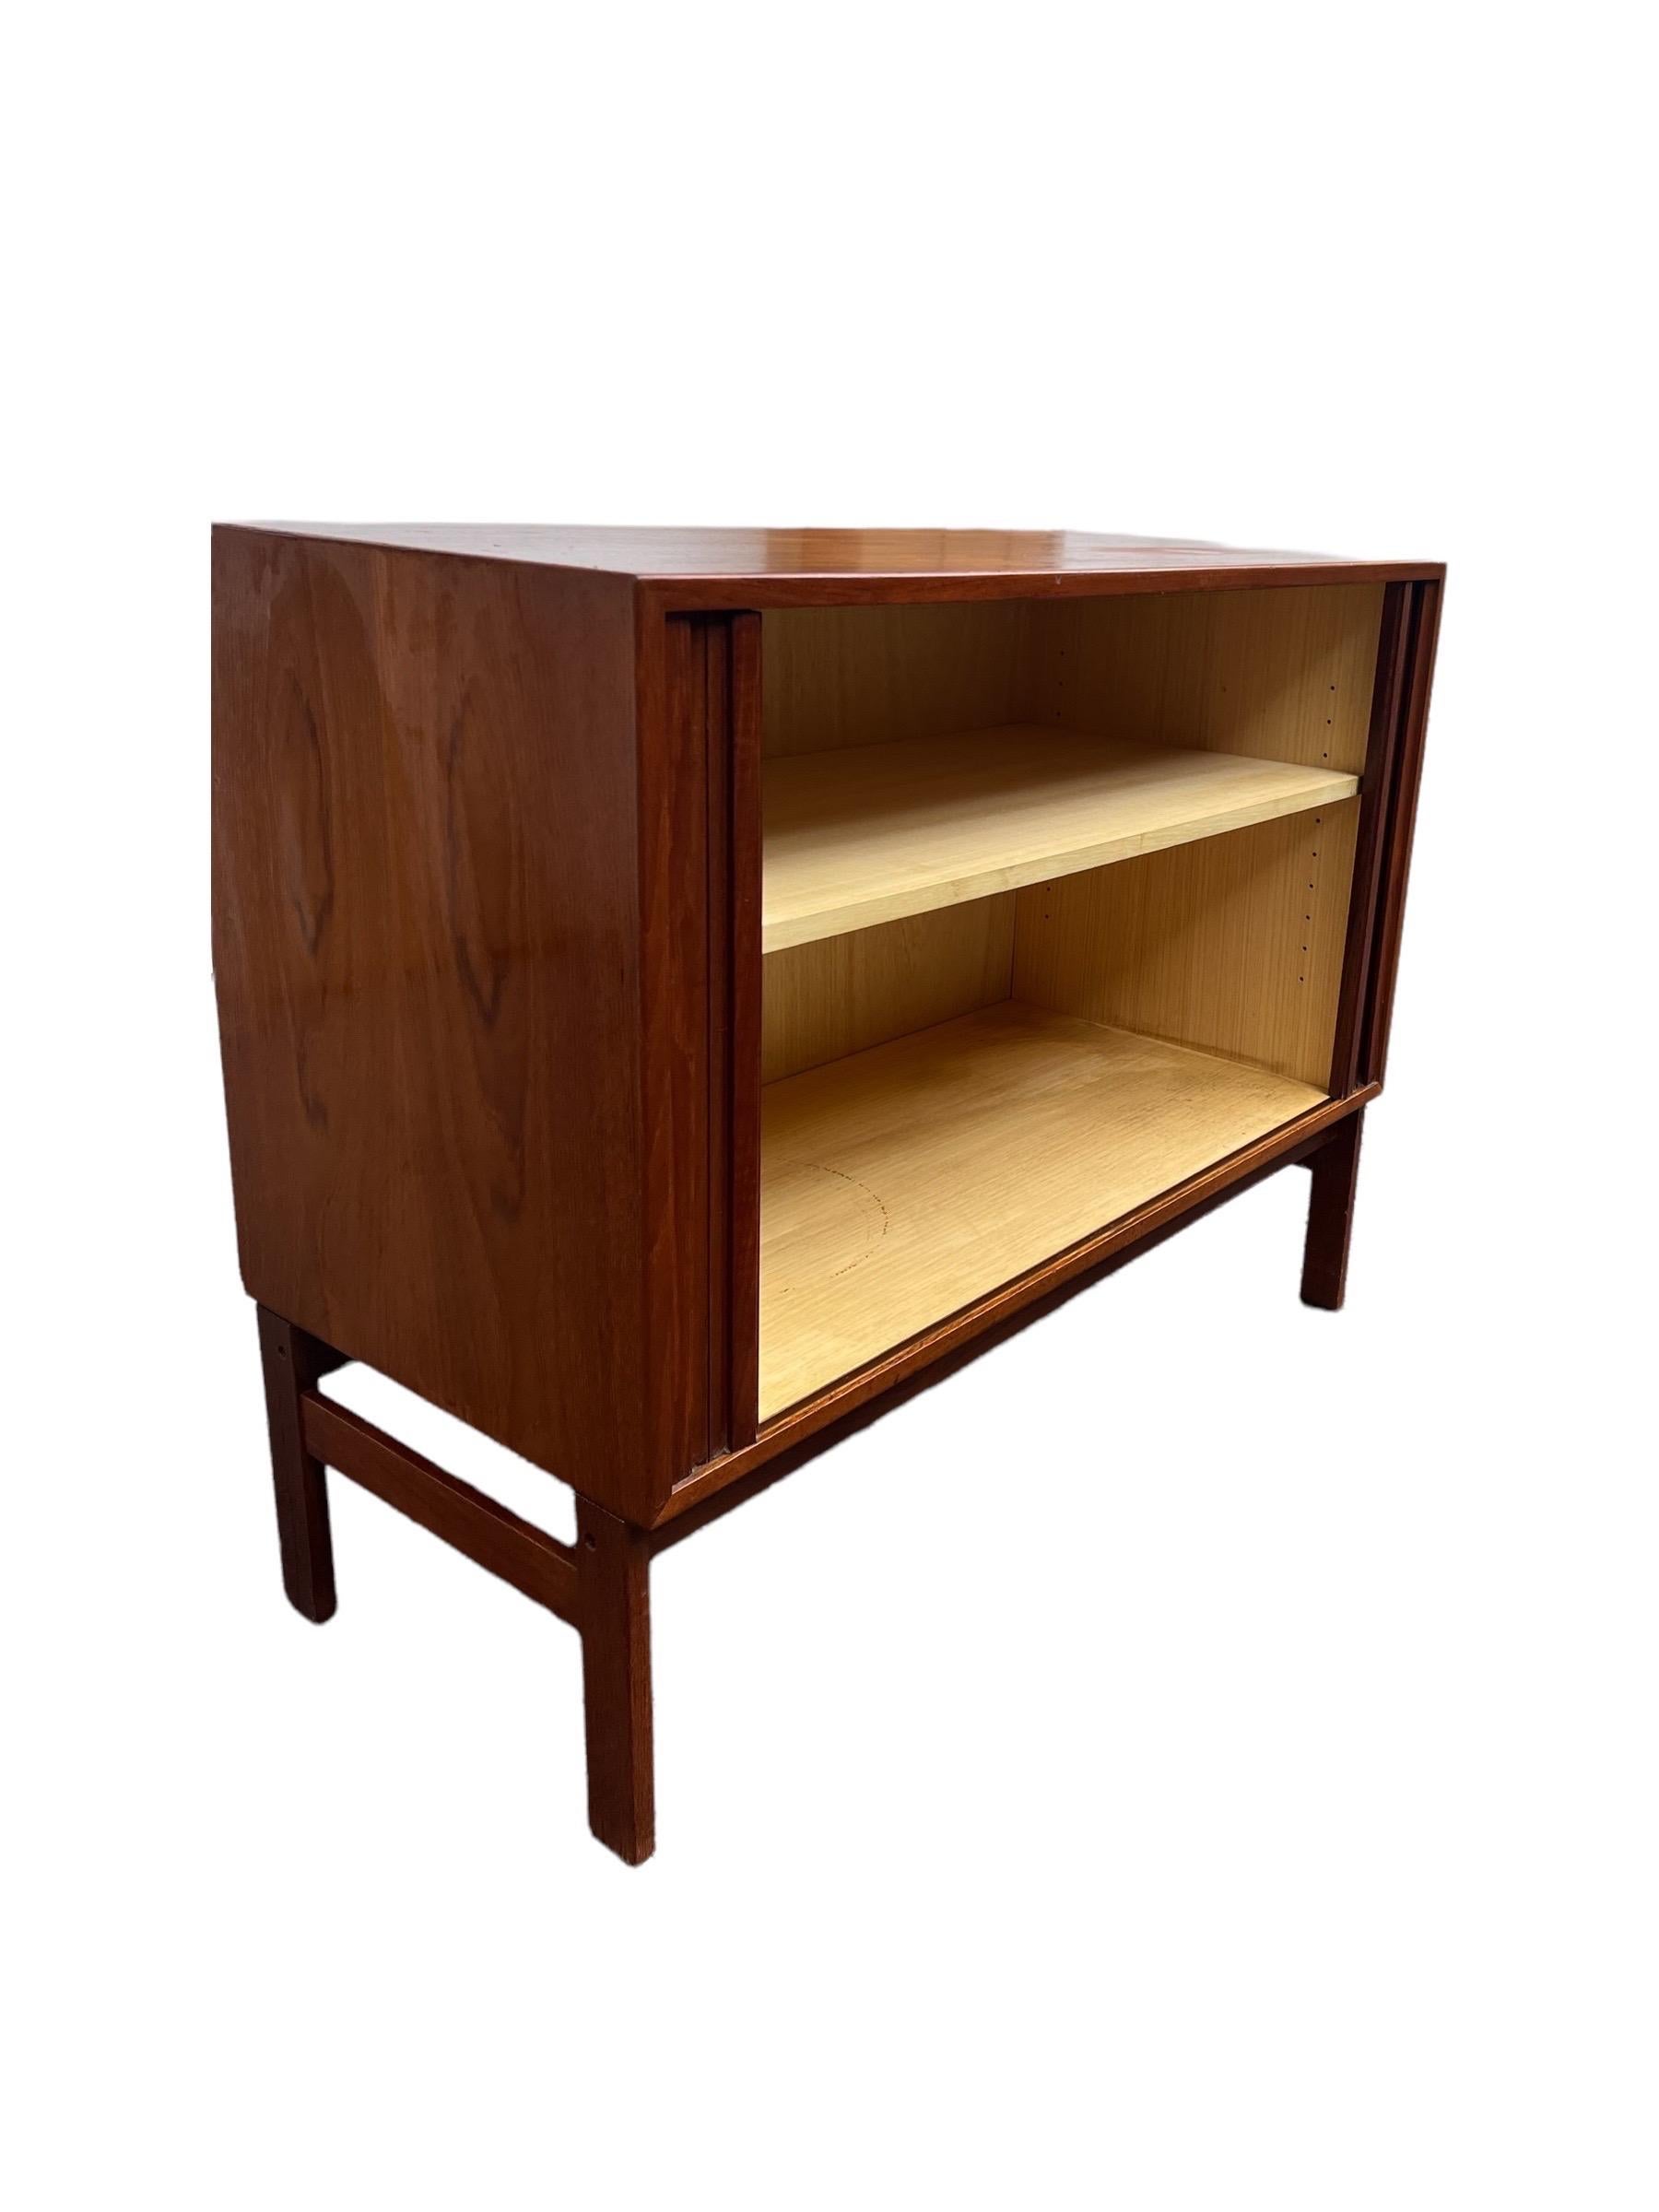 Mid-20th Century Vintage Danish Modern Tambour Door Record Cabinet of Credenza Imported For Sale